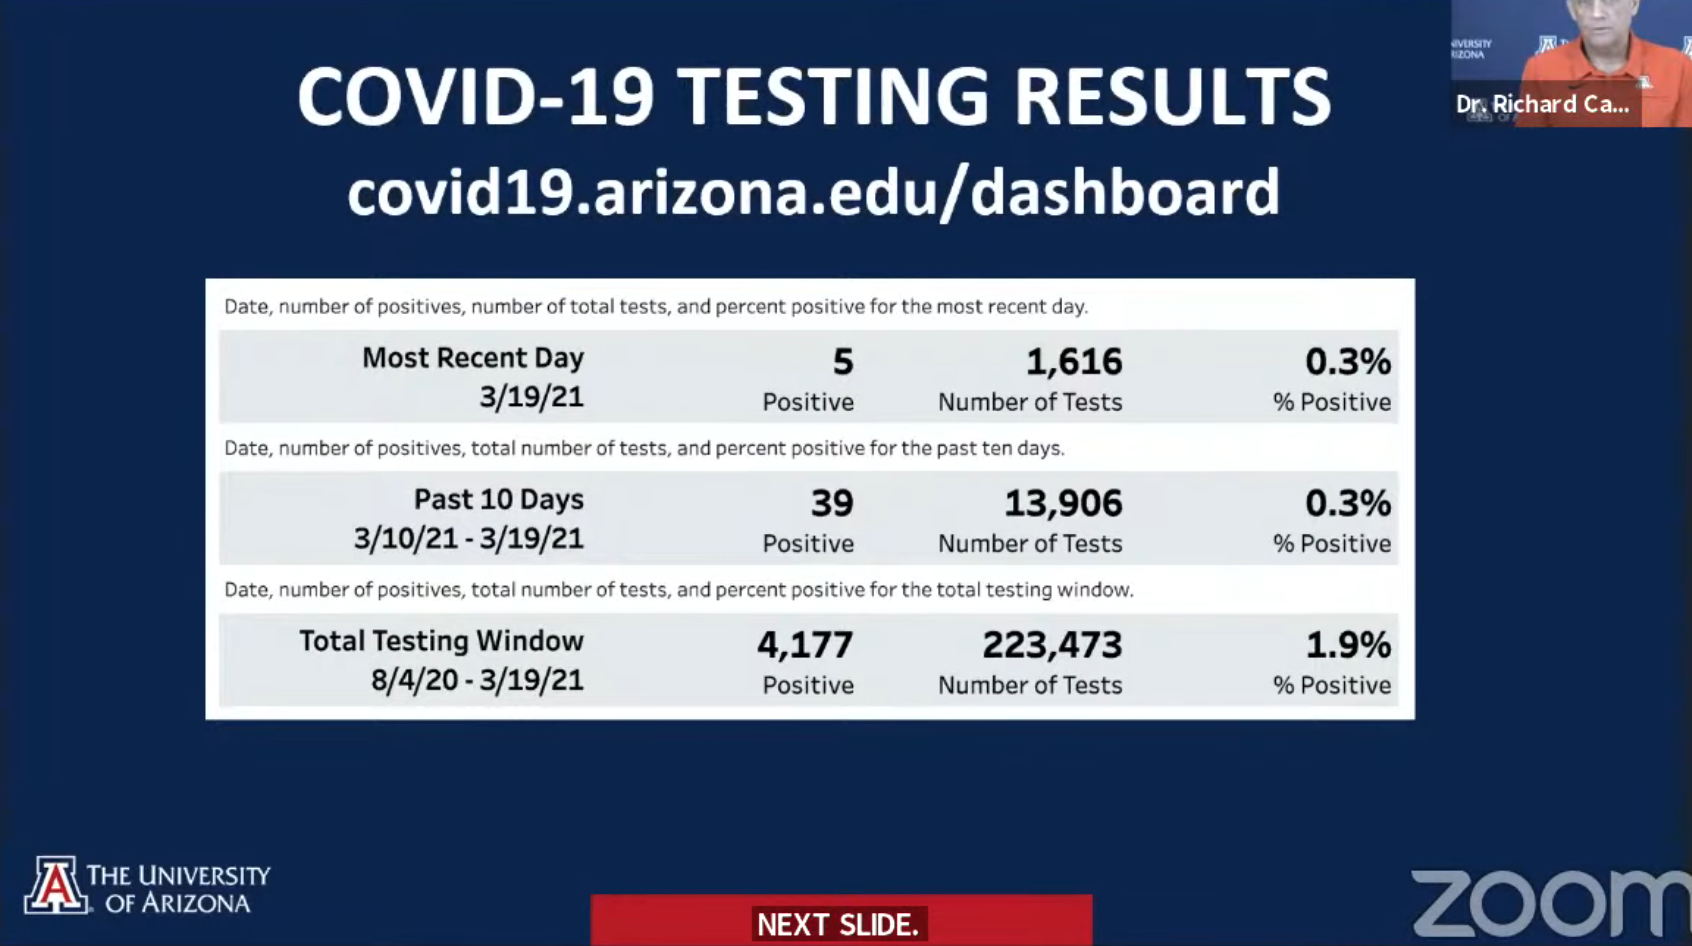 Screenshot of the University of Arizona's recent COVID-19 testing results, which reflected a 0.3% positivity rate.